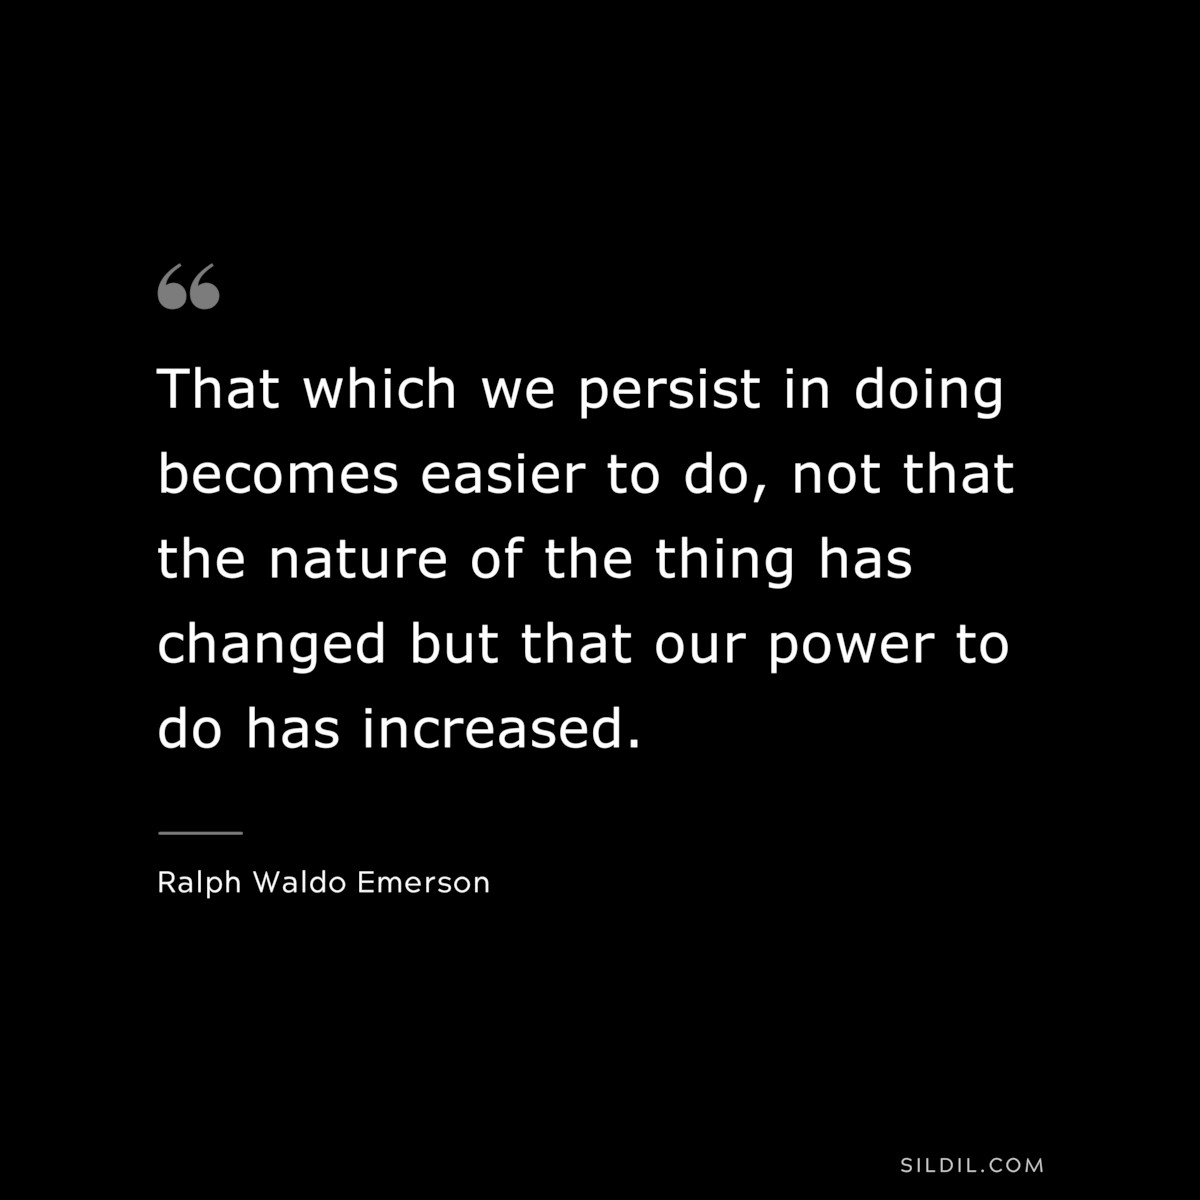 That which we persist in doing becomes easier to do, not that the nature of the thing has changed but that our power to do has increased. — Ralph Waldo Emerson